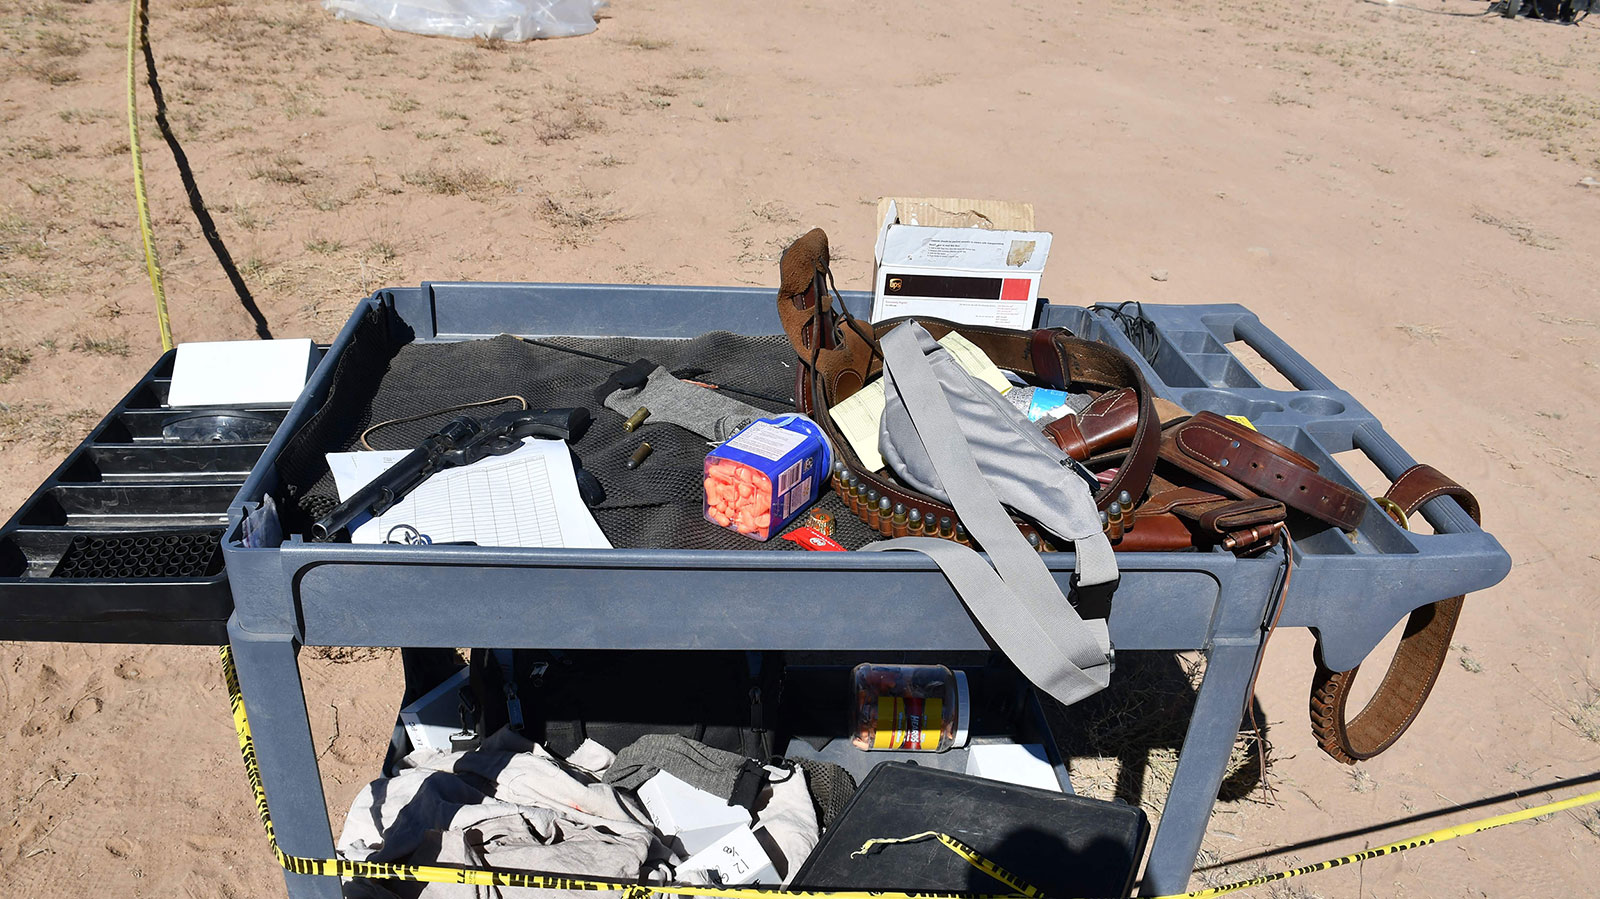 A gun and ammunition are seen in a prop cart near the shooting scene.